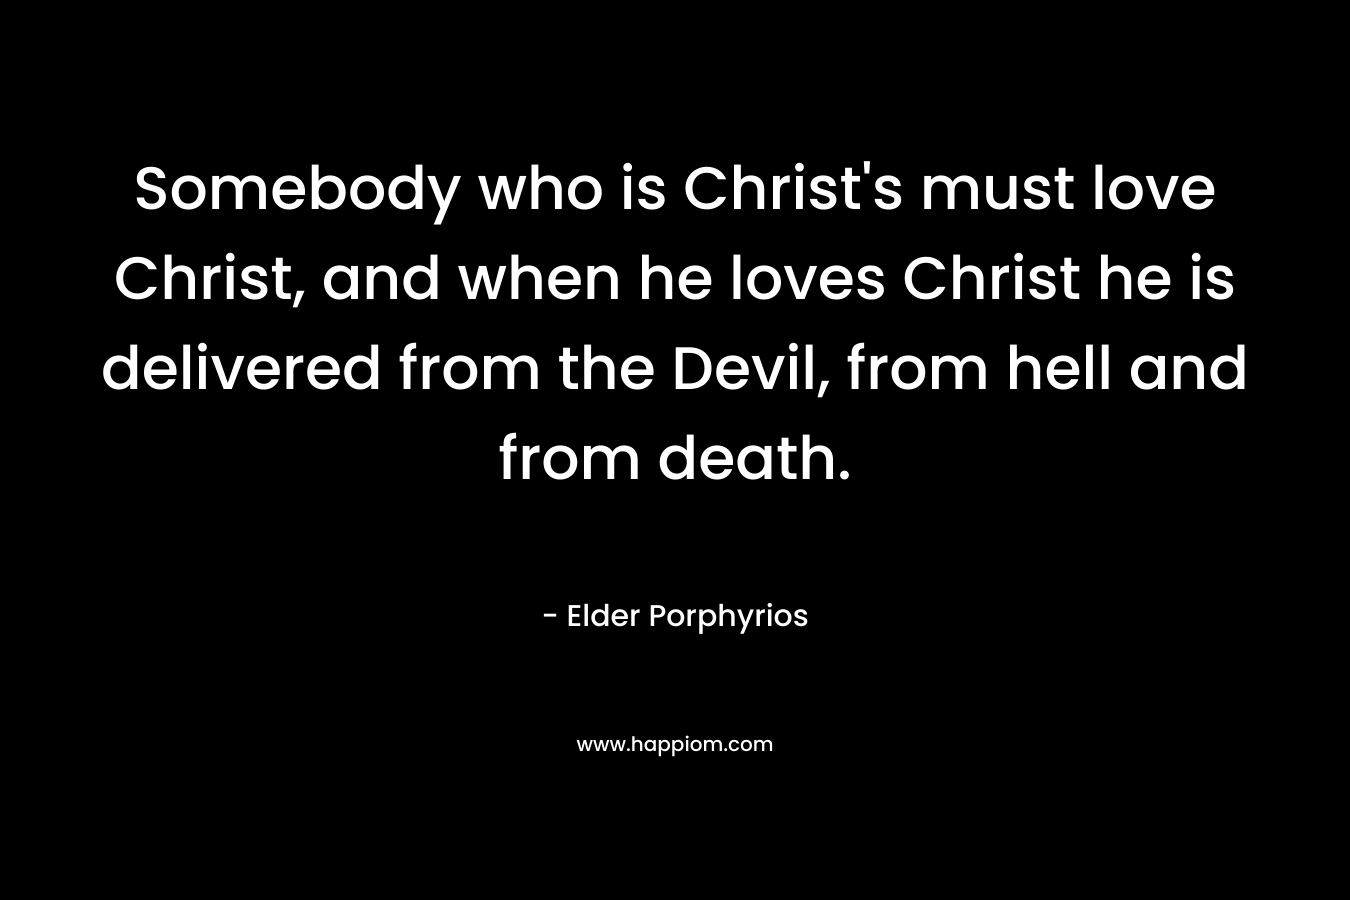 Somebody who is Christ's must love Christ, and when he loves Christ he is delivered from the Devil, from hell and from death.